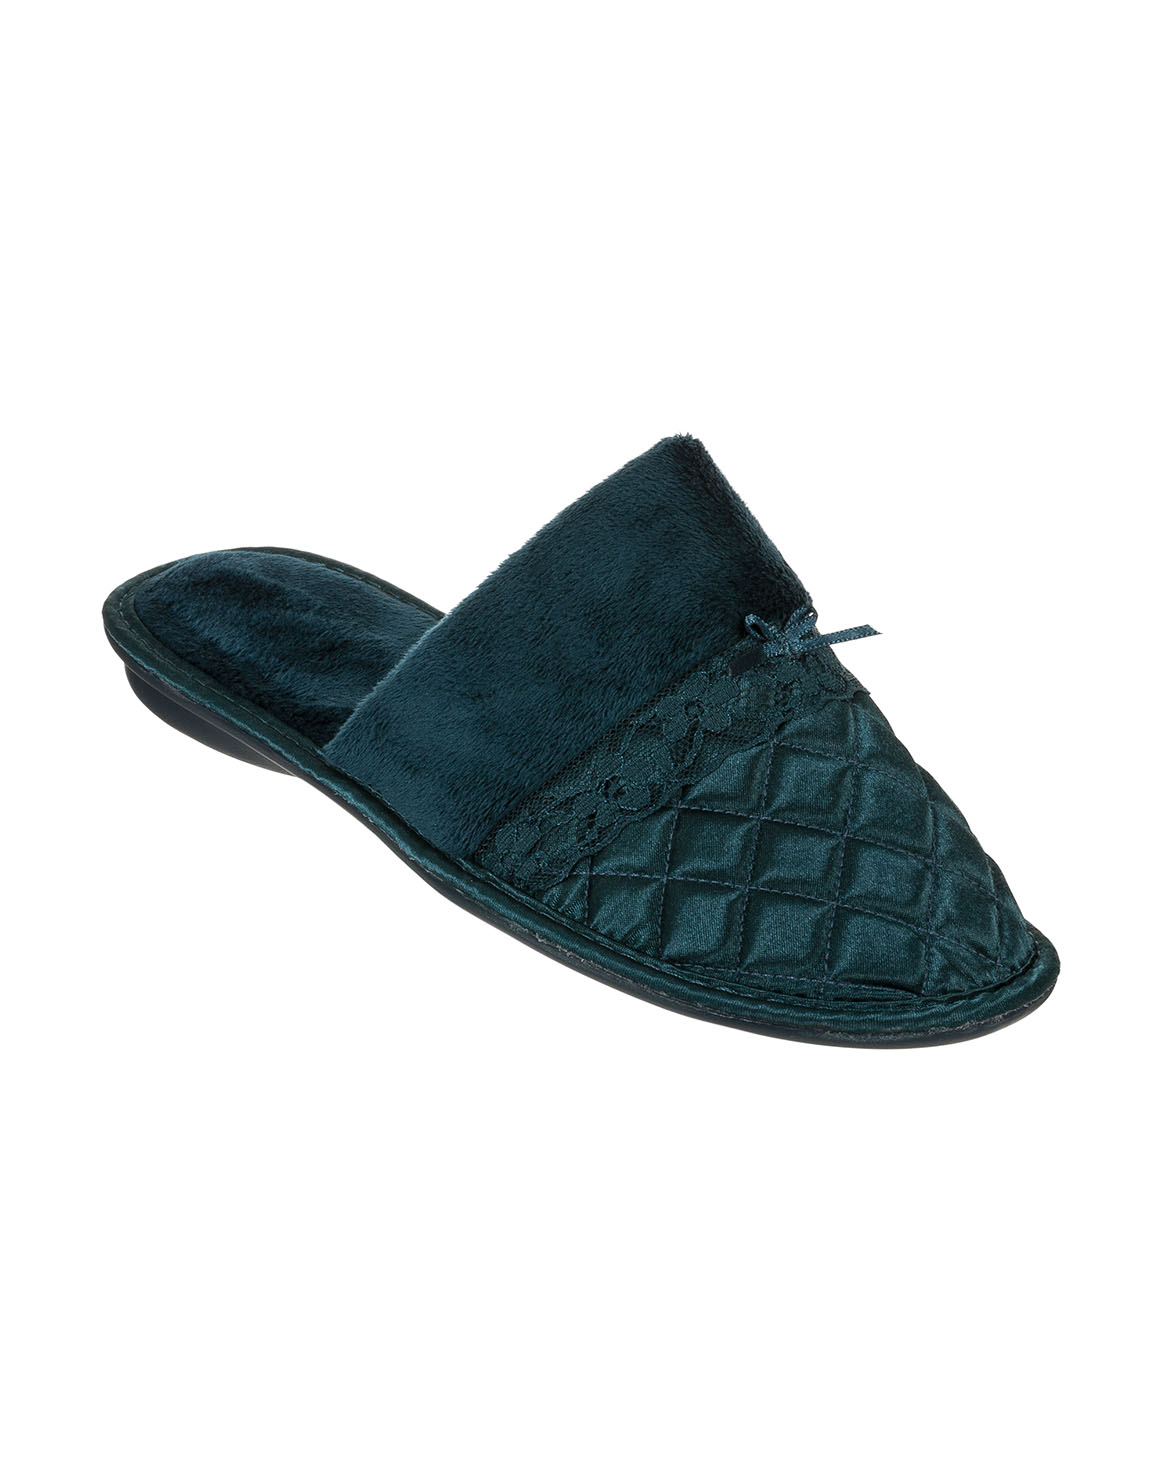 Quilted Satin Mule Slippers 